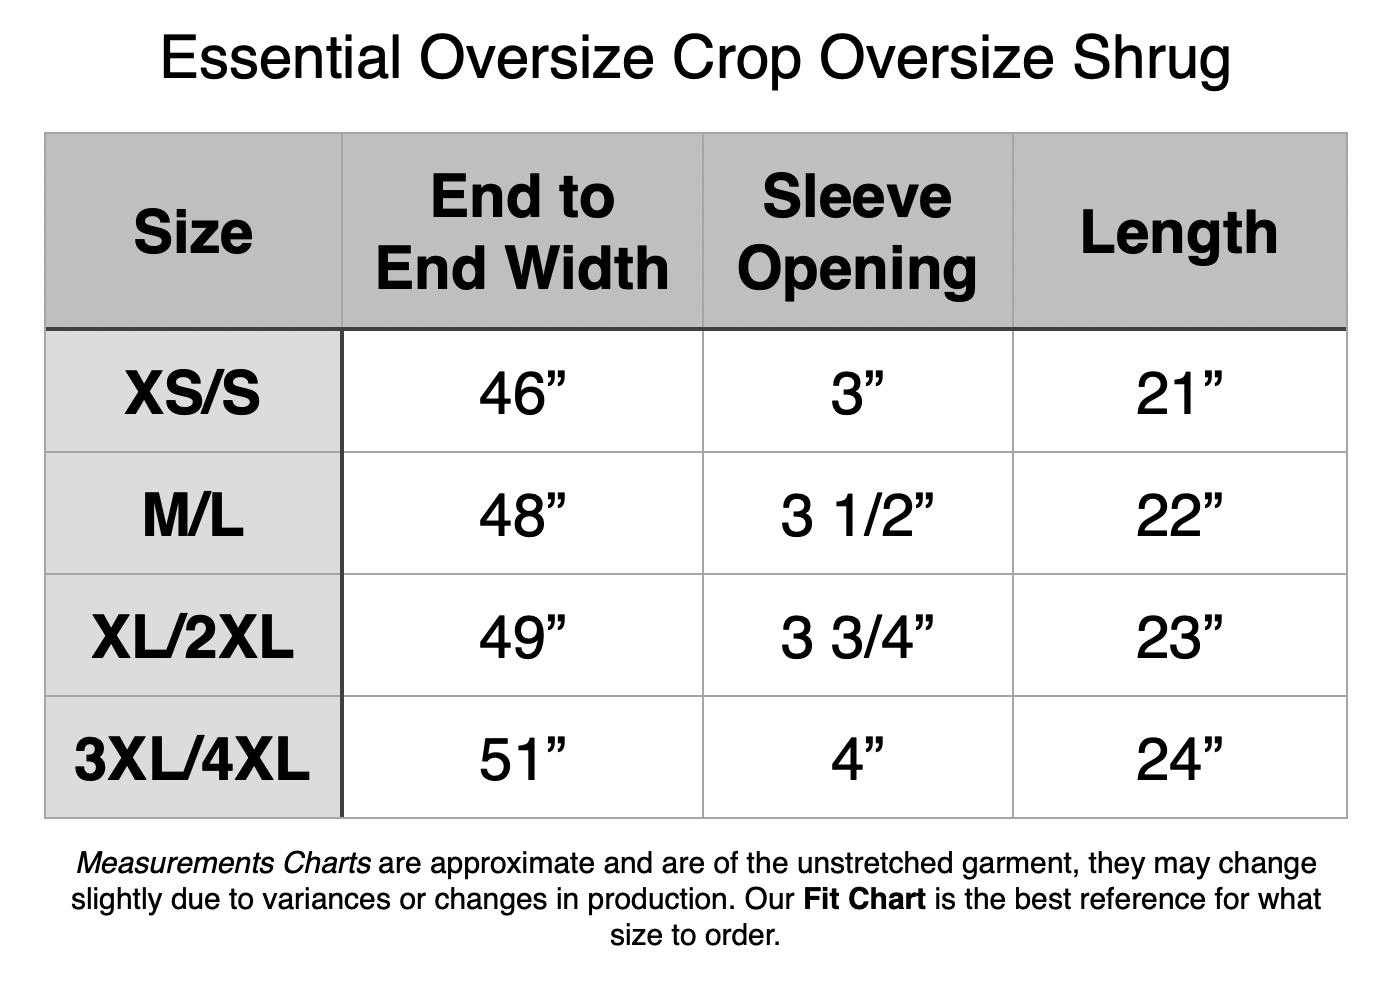 Essential Oversize Crop Oversize Shrug -  XS/S: 46" End to End, 3" Sleeve Opening, 21" Length. M/L: 48" End to End, 3.5" Sleeve Opening, 22" Length. XL/2XL: 49" End to End, 3.75" Sleeve Opening, 23" Length. 2XL/3XL: 51" End to End, 4" Sleeve Opening, 24" Length.